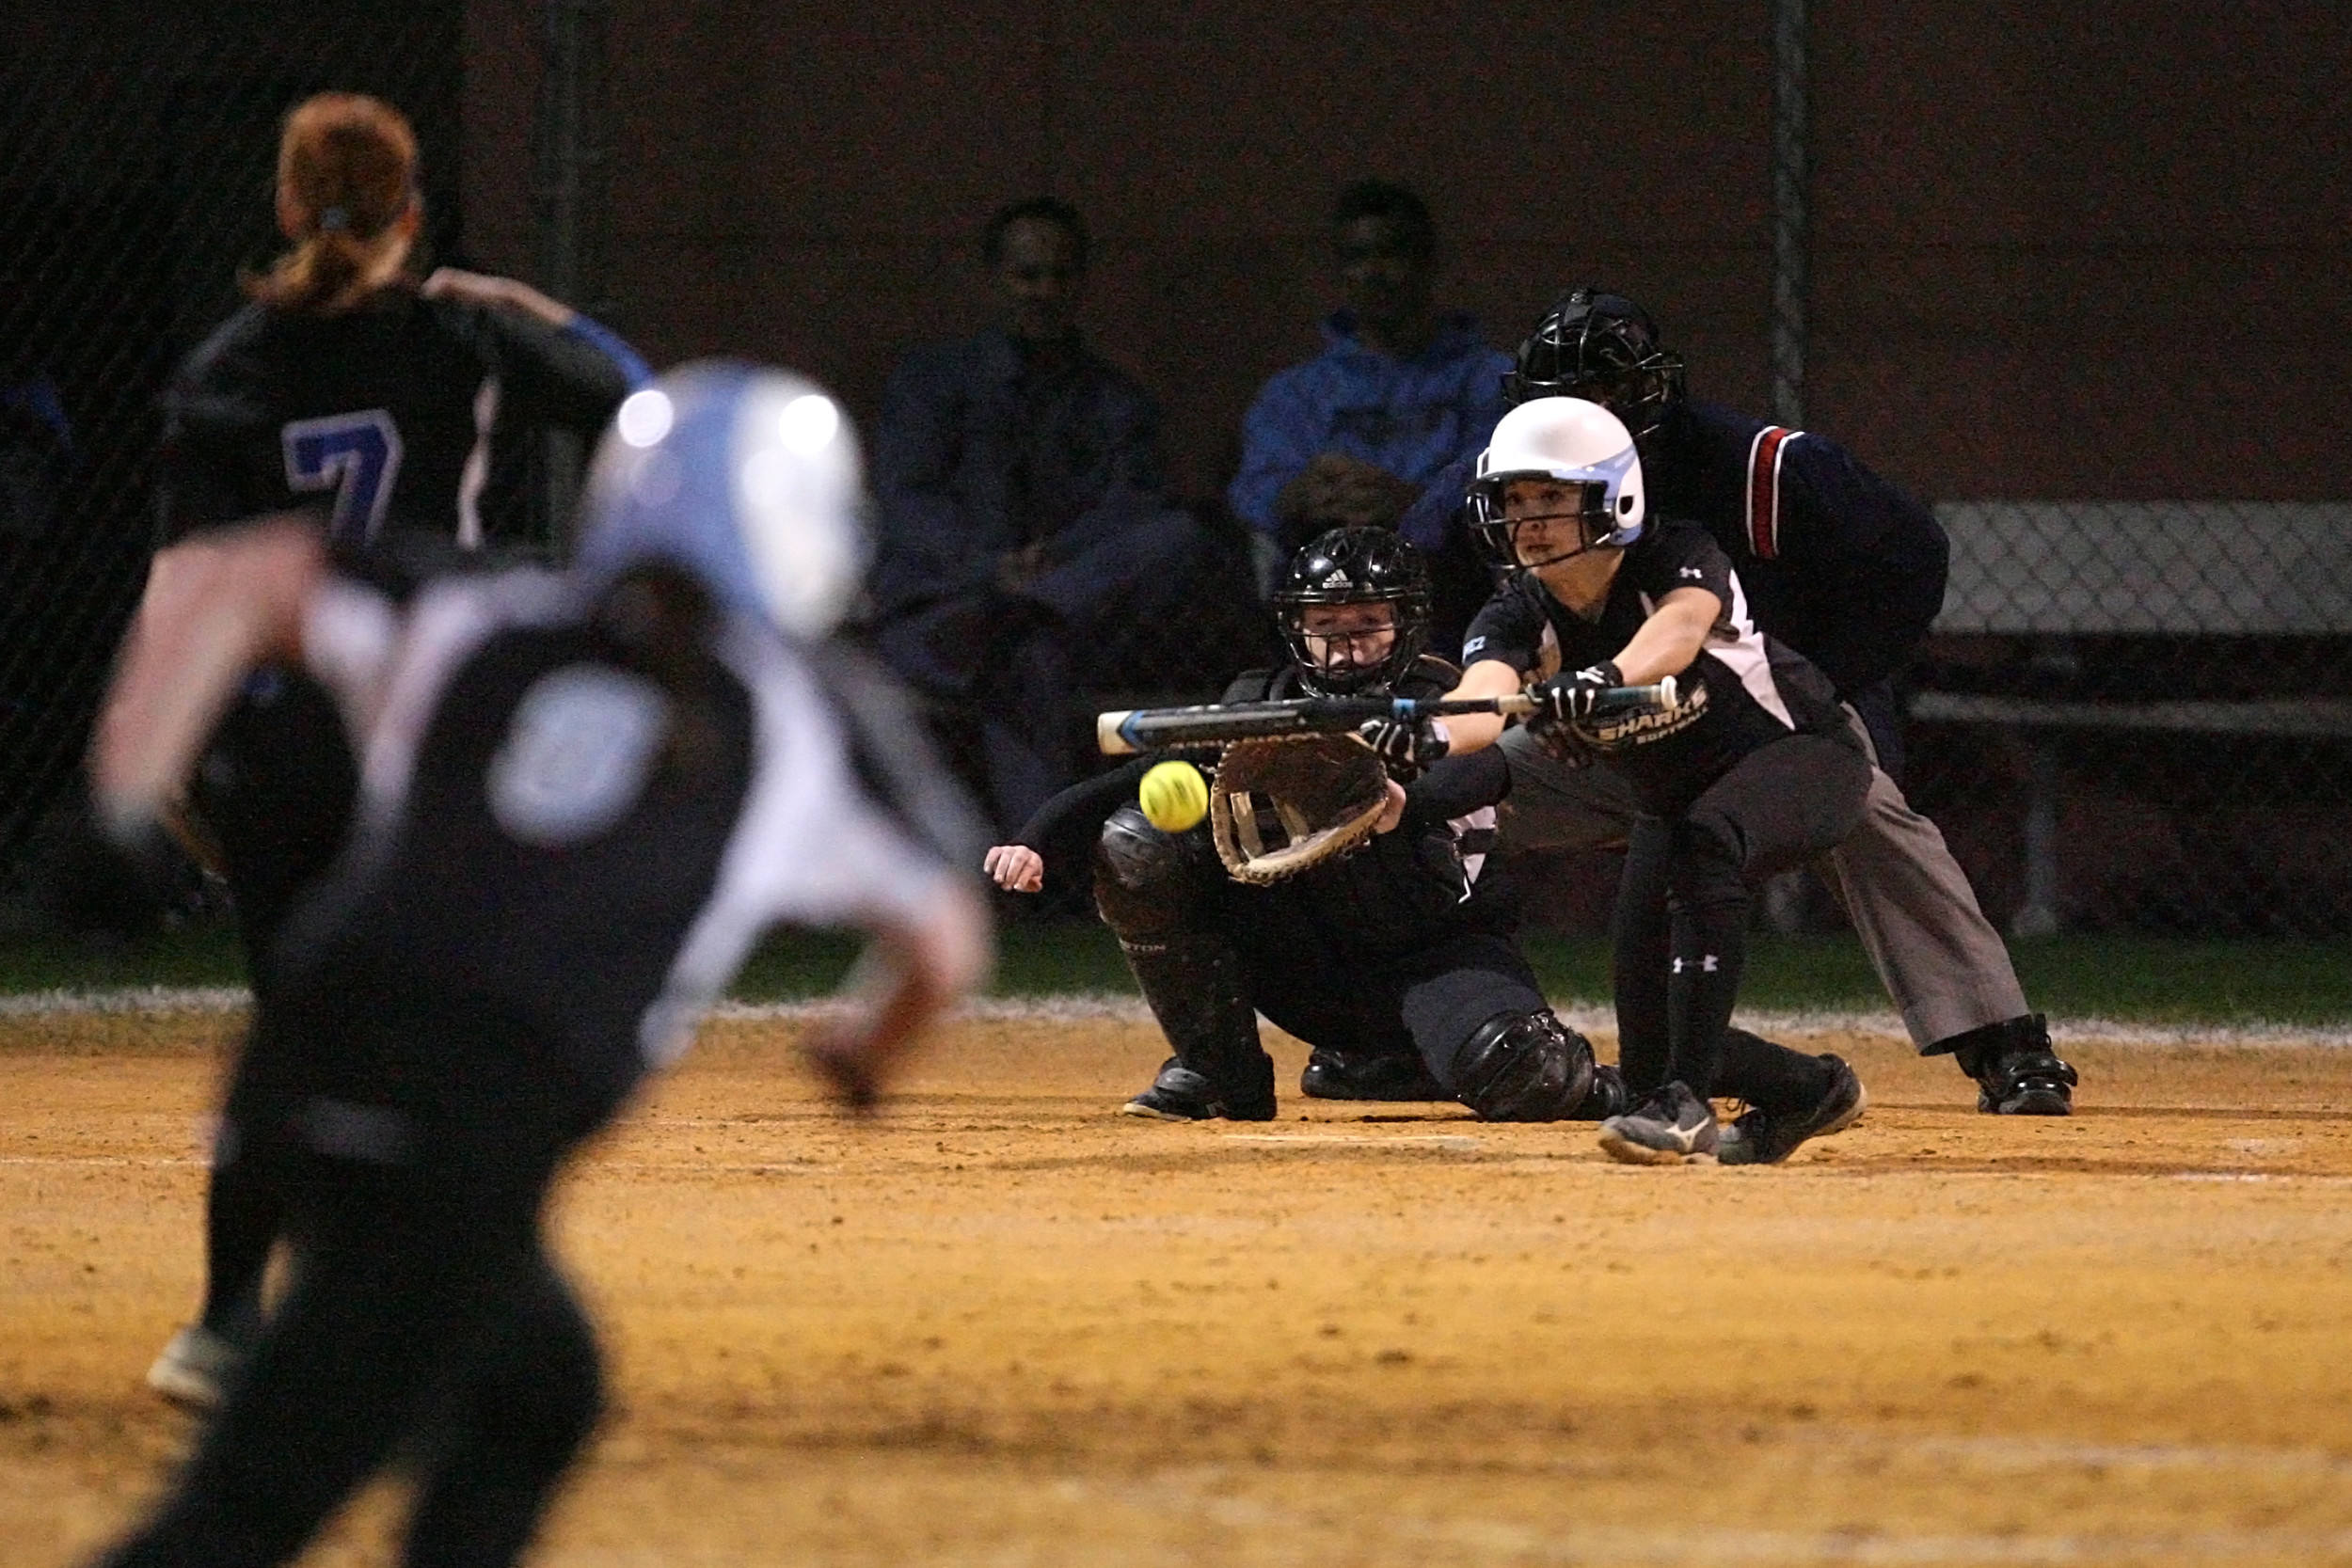 Kiley Hennessy lays down a perfect sacrifice bunt for Ponte Vedra